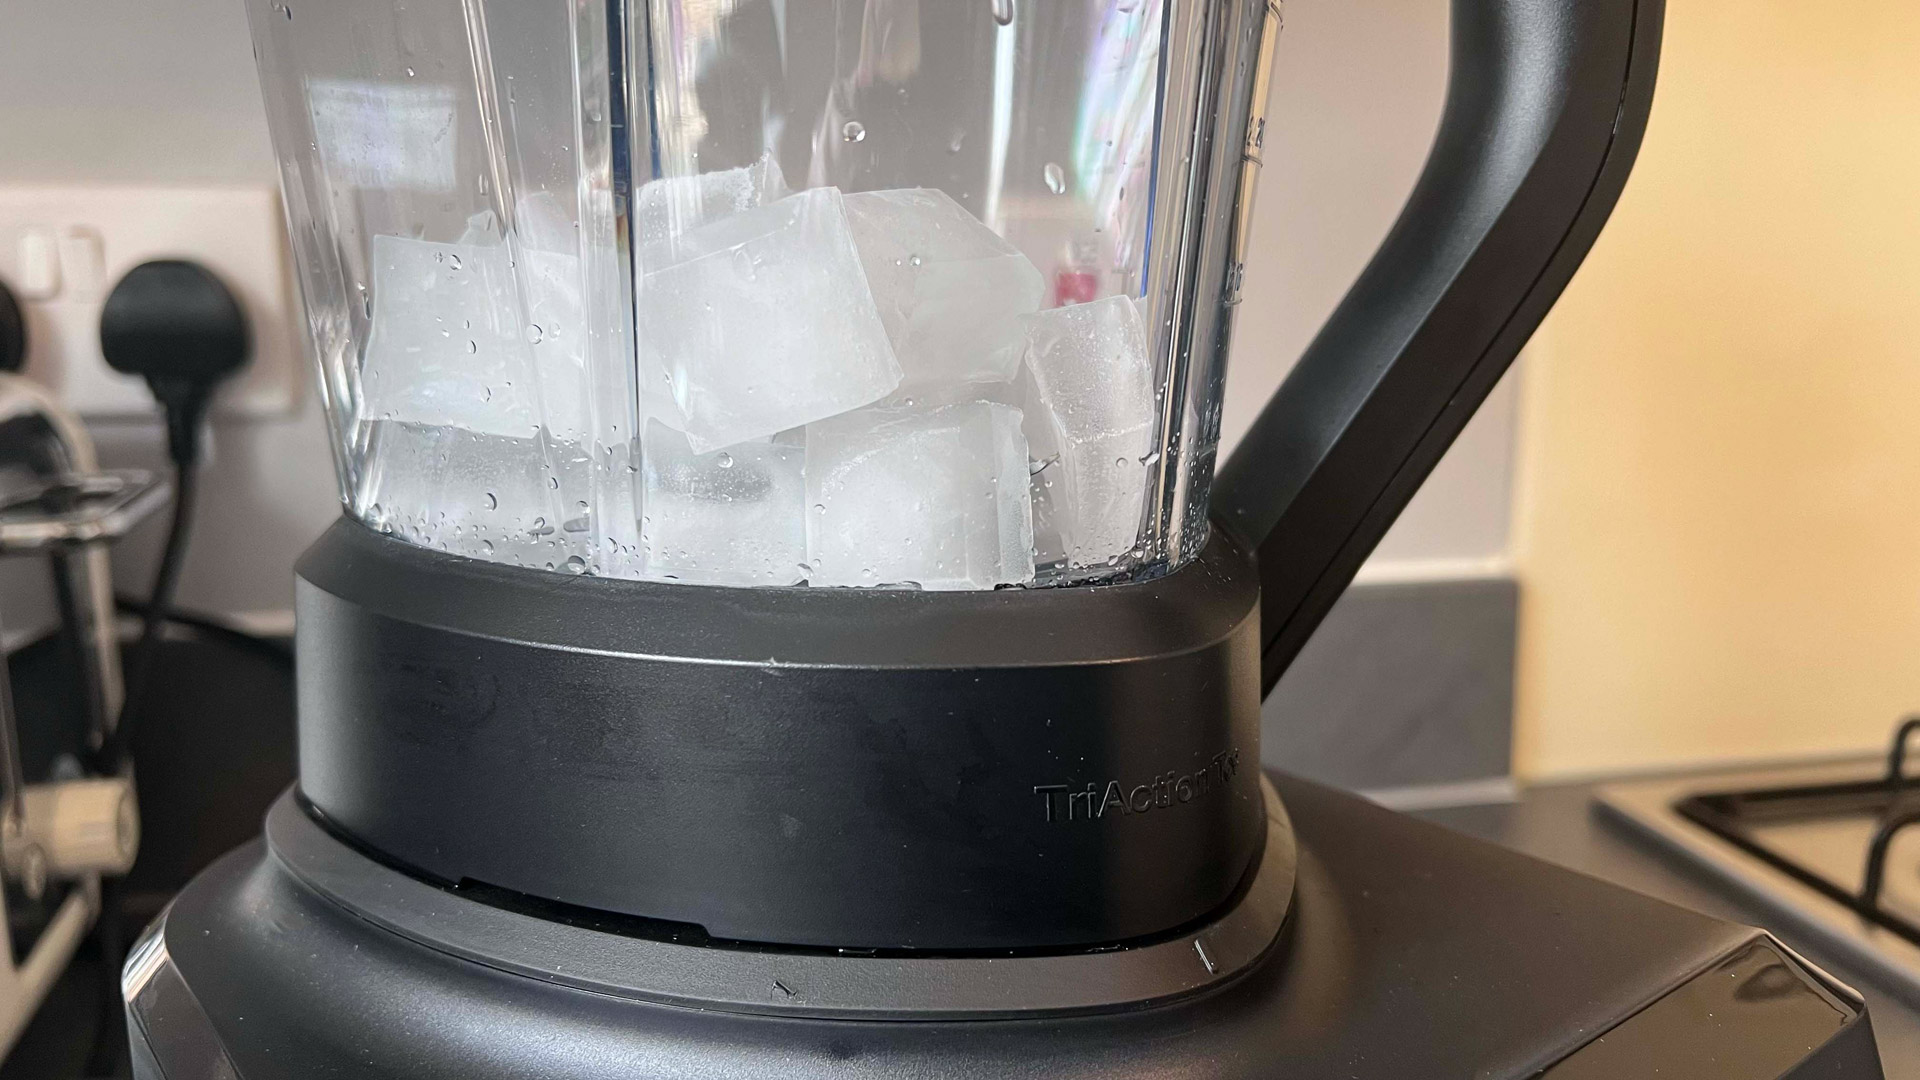 Ice cubes in the Braun TriForce Power Blender